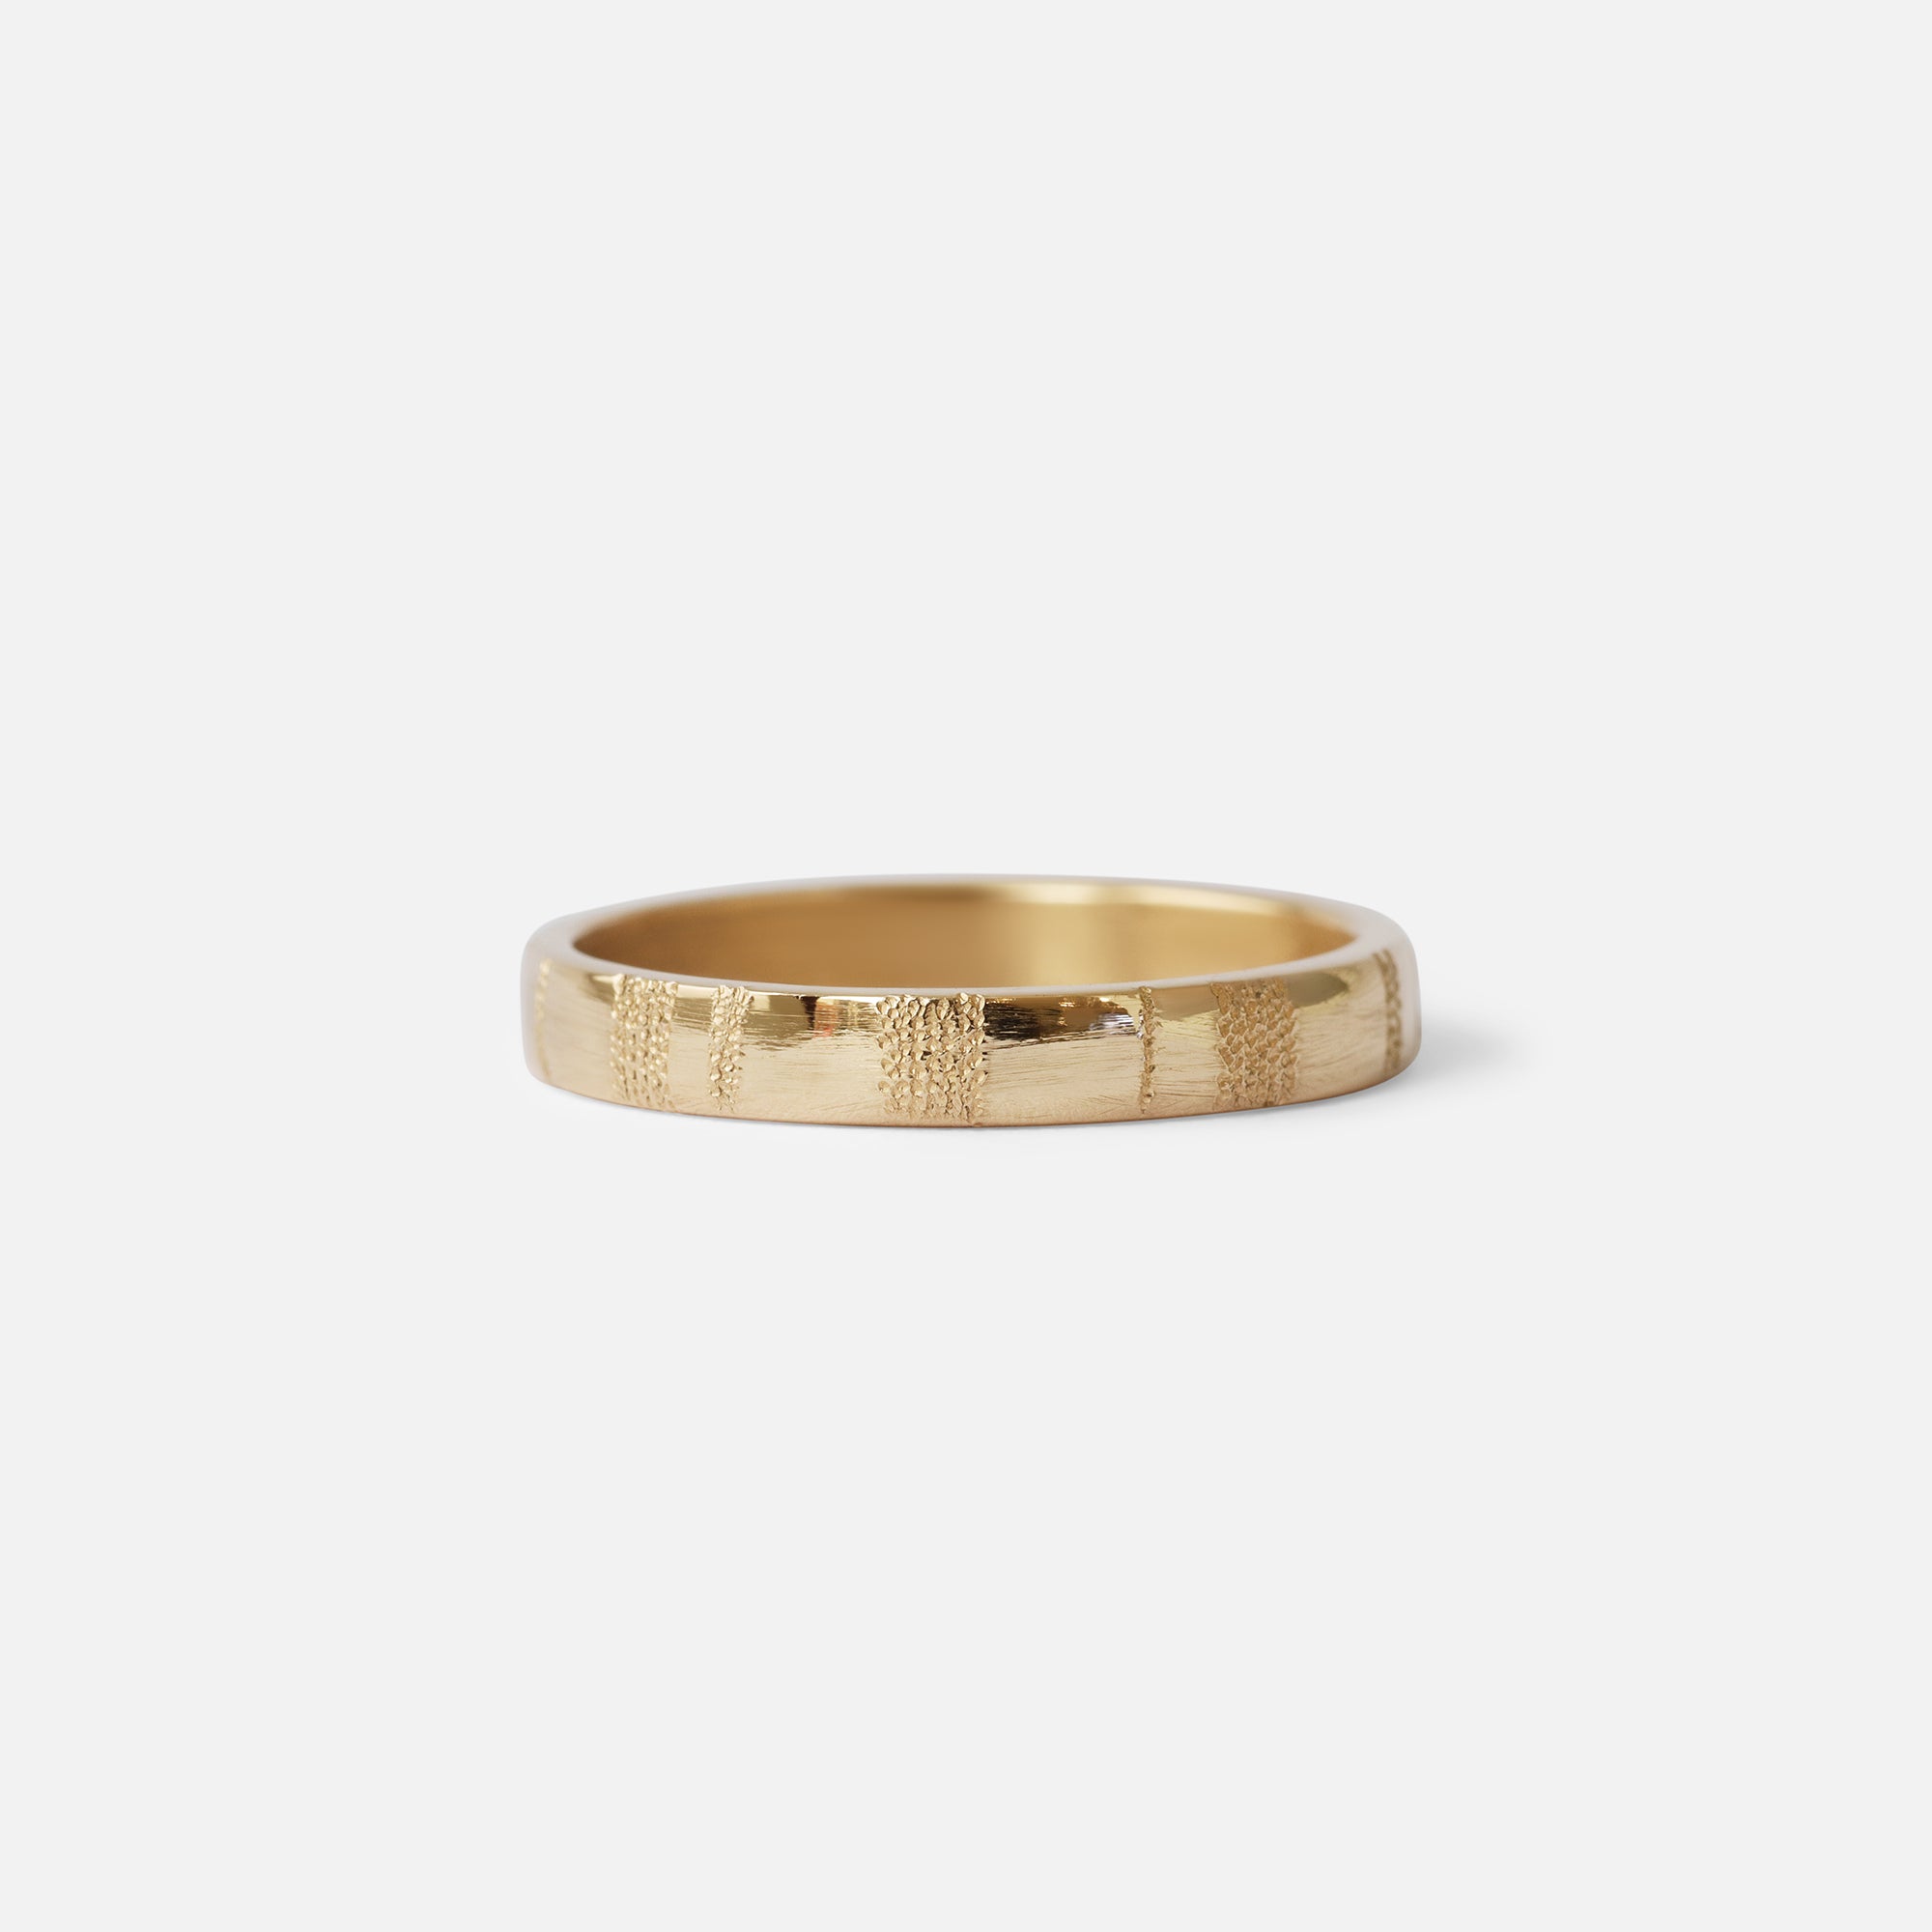 Stippled Stripe Band By Young Sun Song in rings Category